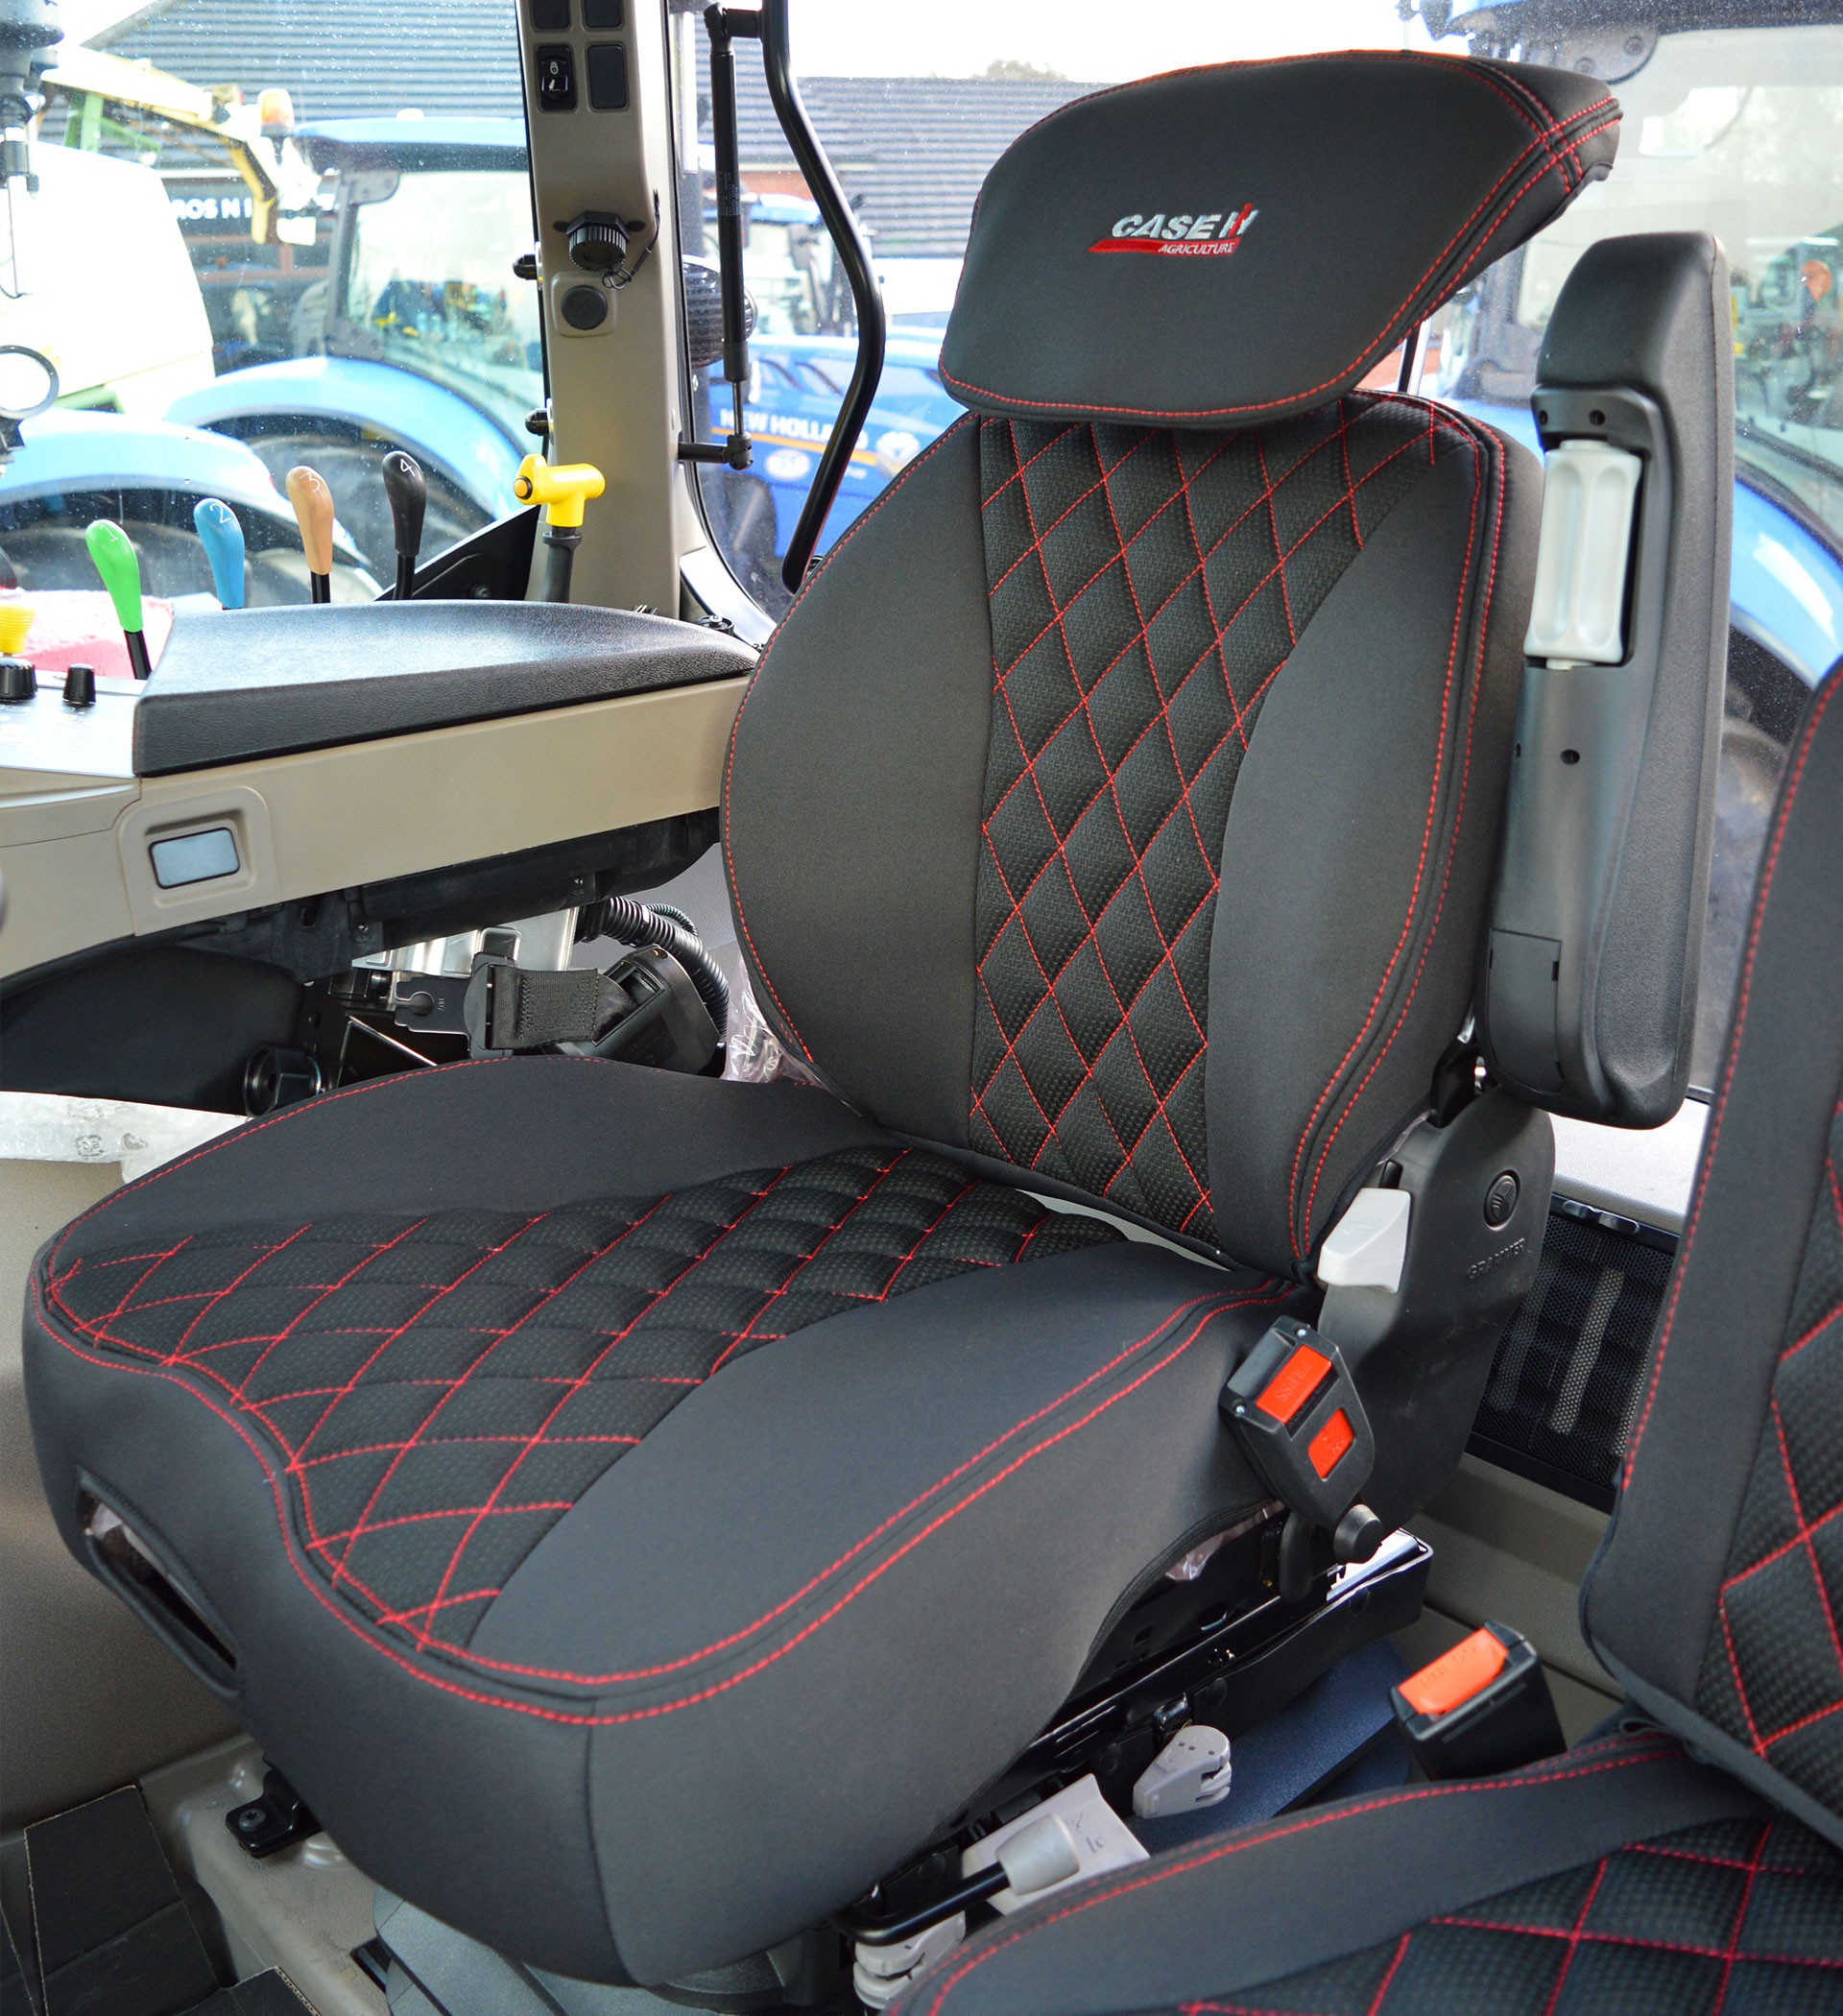 Case IH Tractor Tailored Seat Covers For Grammer Dynamic Air Seat and